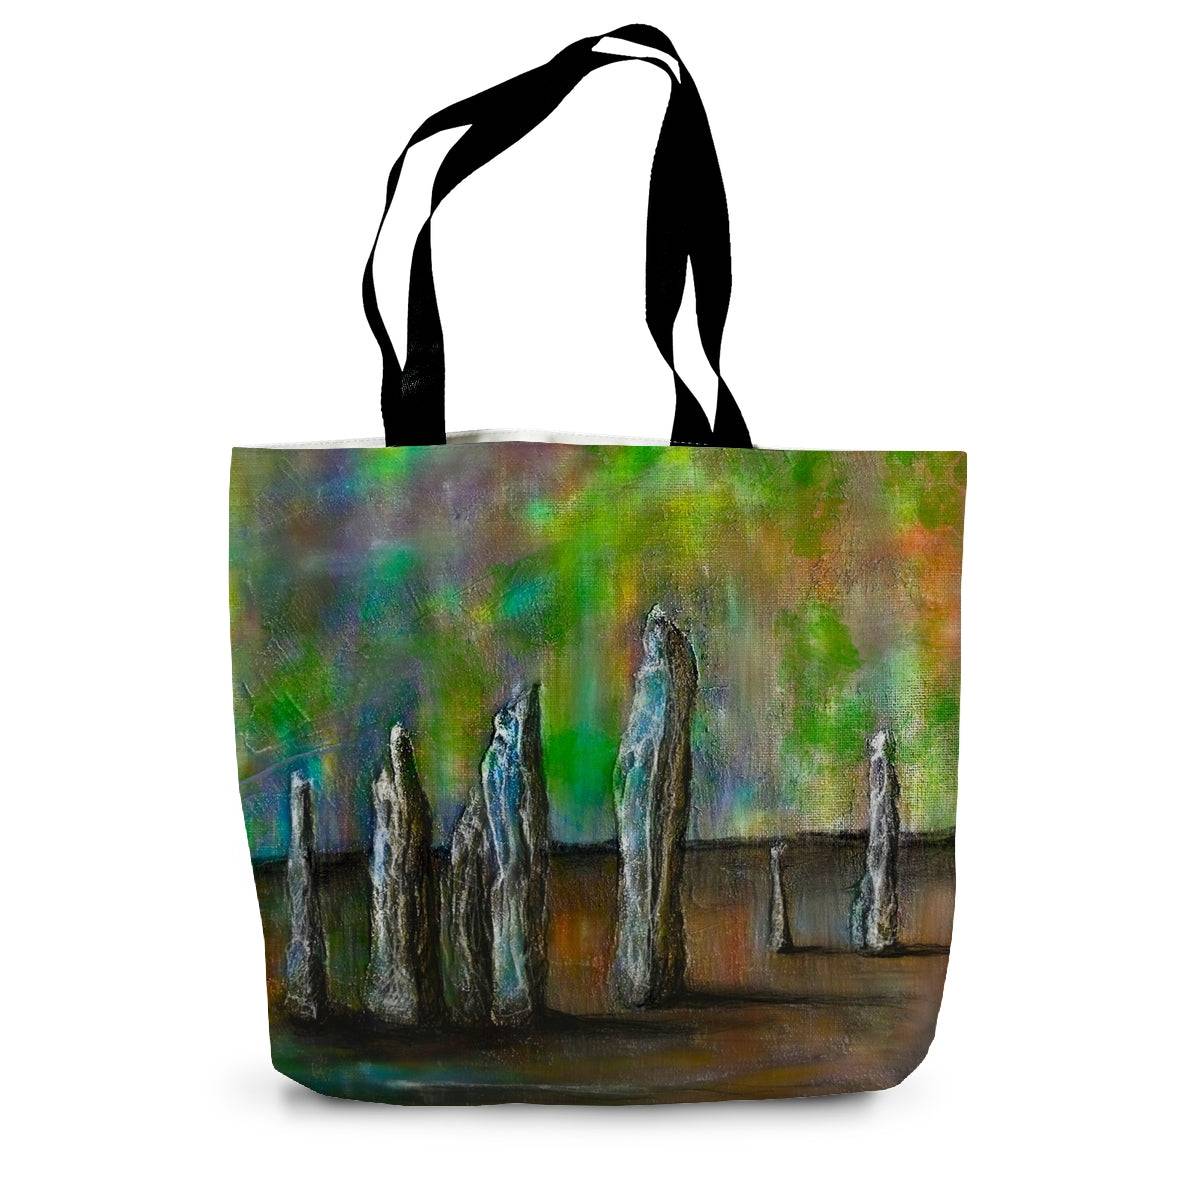 Callanish Northern Lights Art Gifts Canvas Tote Bag-Bags-Hebridean Islands Art Gallery-14"x18.5"-Paintings, Prints, Homeware, Art Gifts From Scotland By Scottish Artist Kevin Hunter